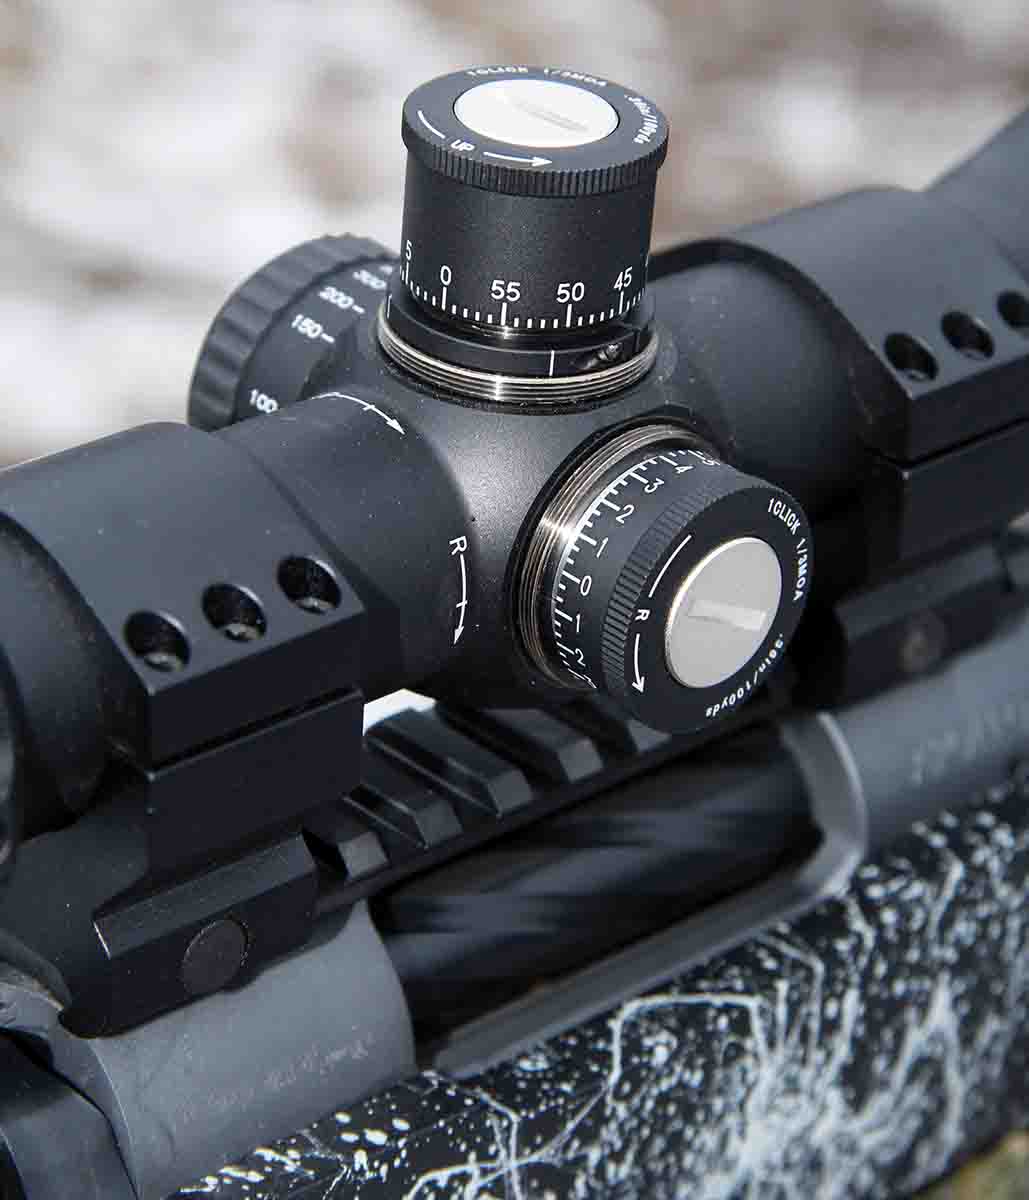 The turrets of the Huskemaw Blue Diamond 5-20x 50mm scope include aluminum screw-on cover caps and are weatherproof when exposed to the elements.